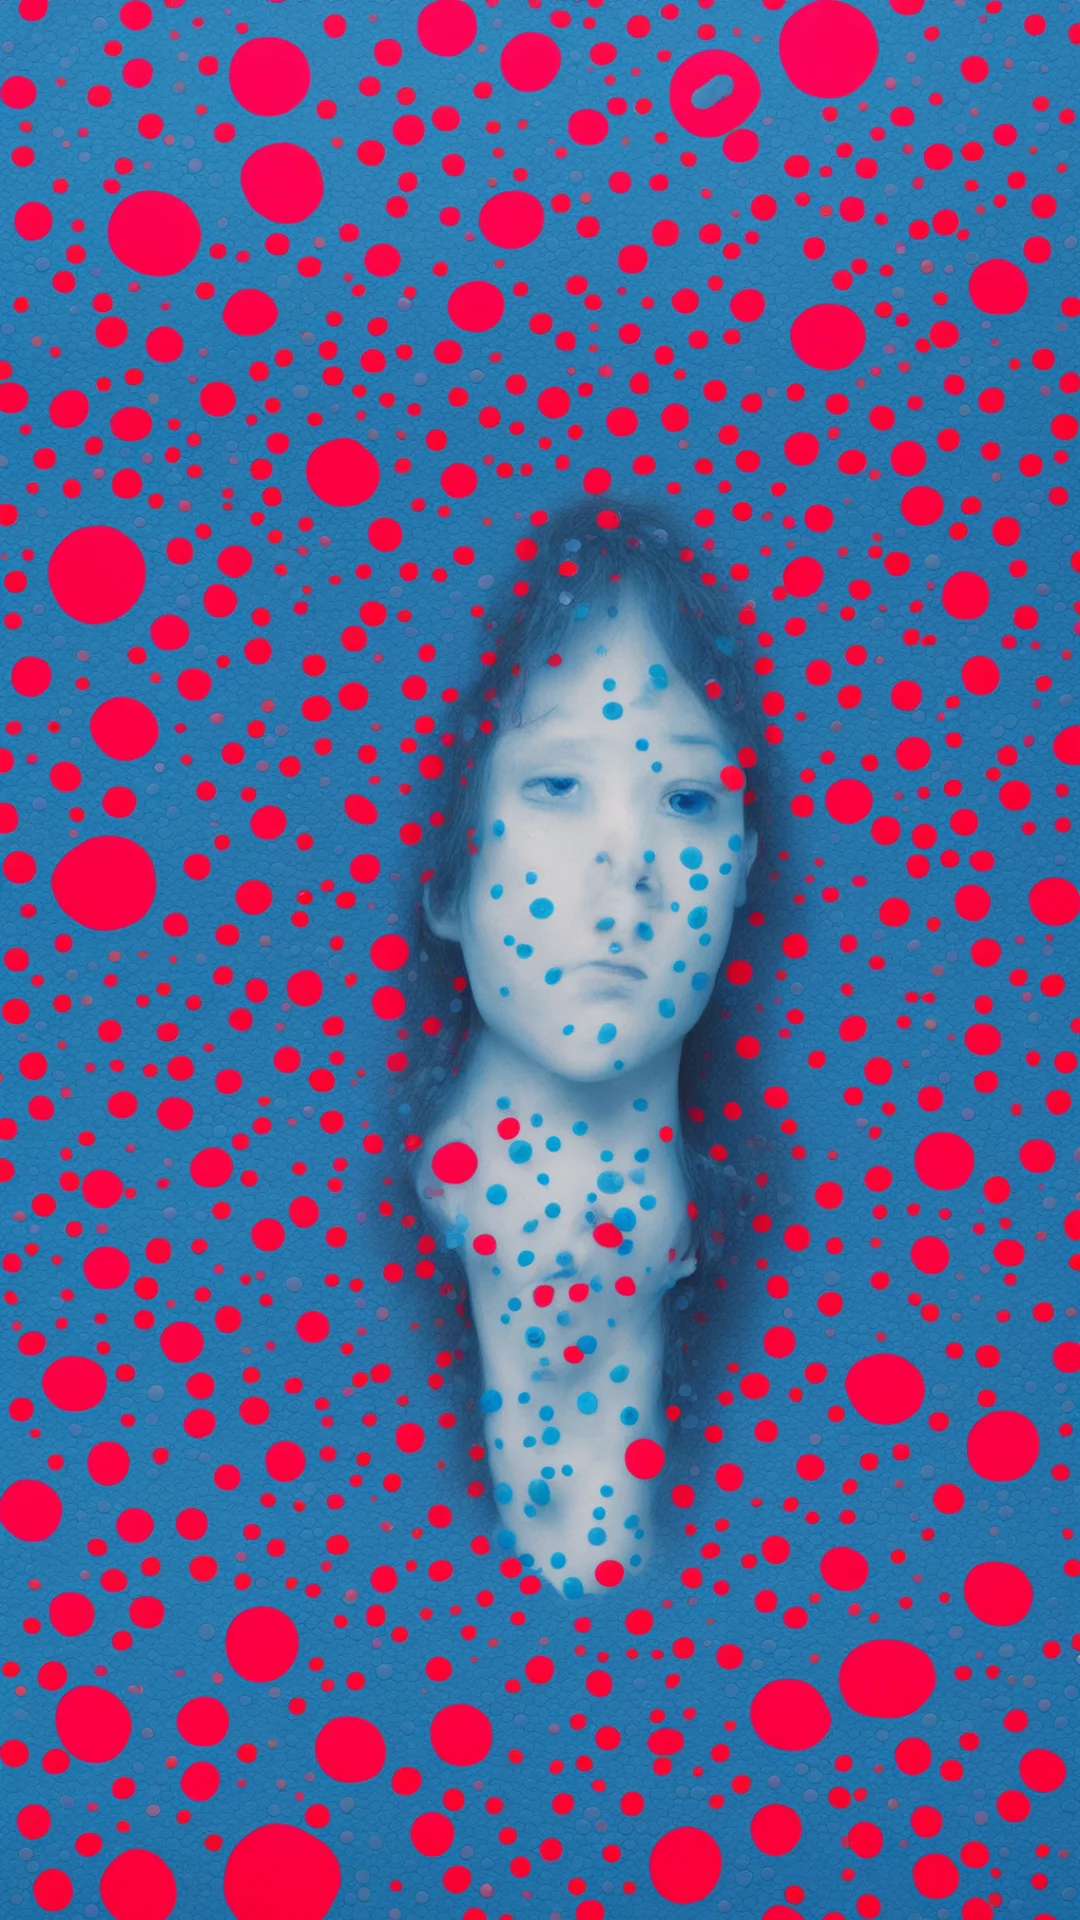 angst and distress in blue tones yayoi kusama style tall